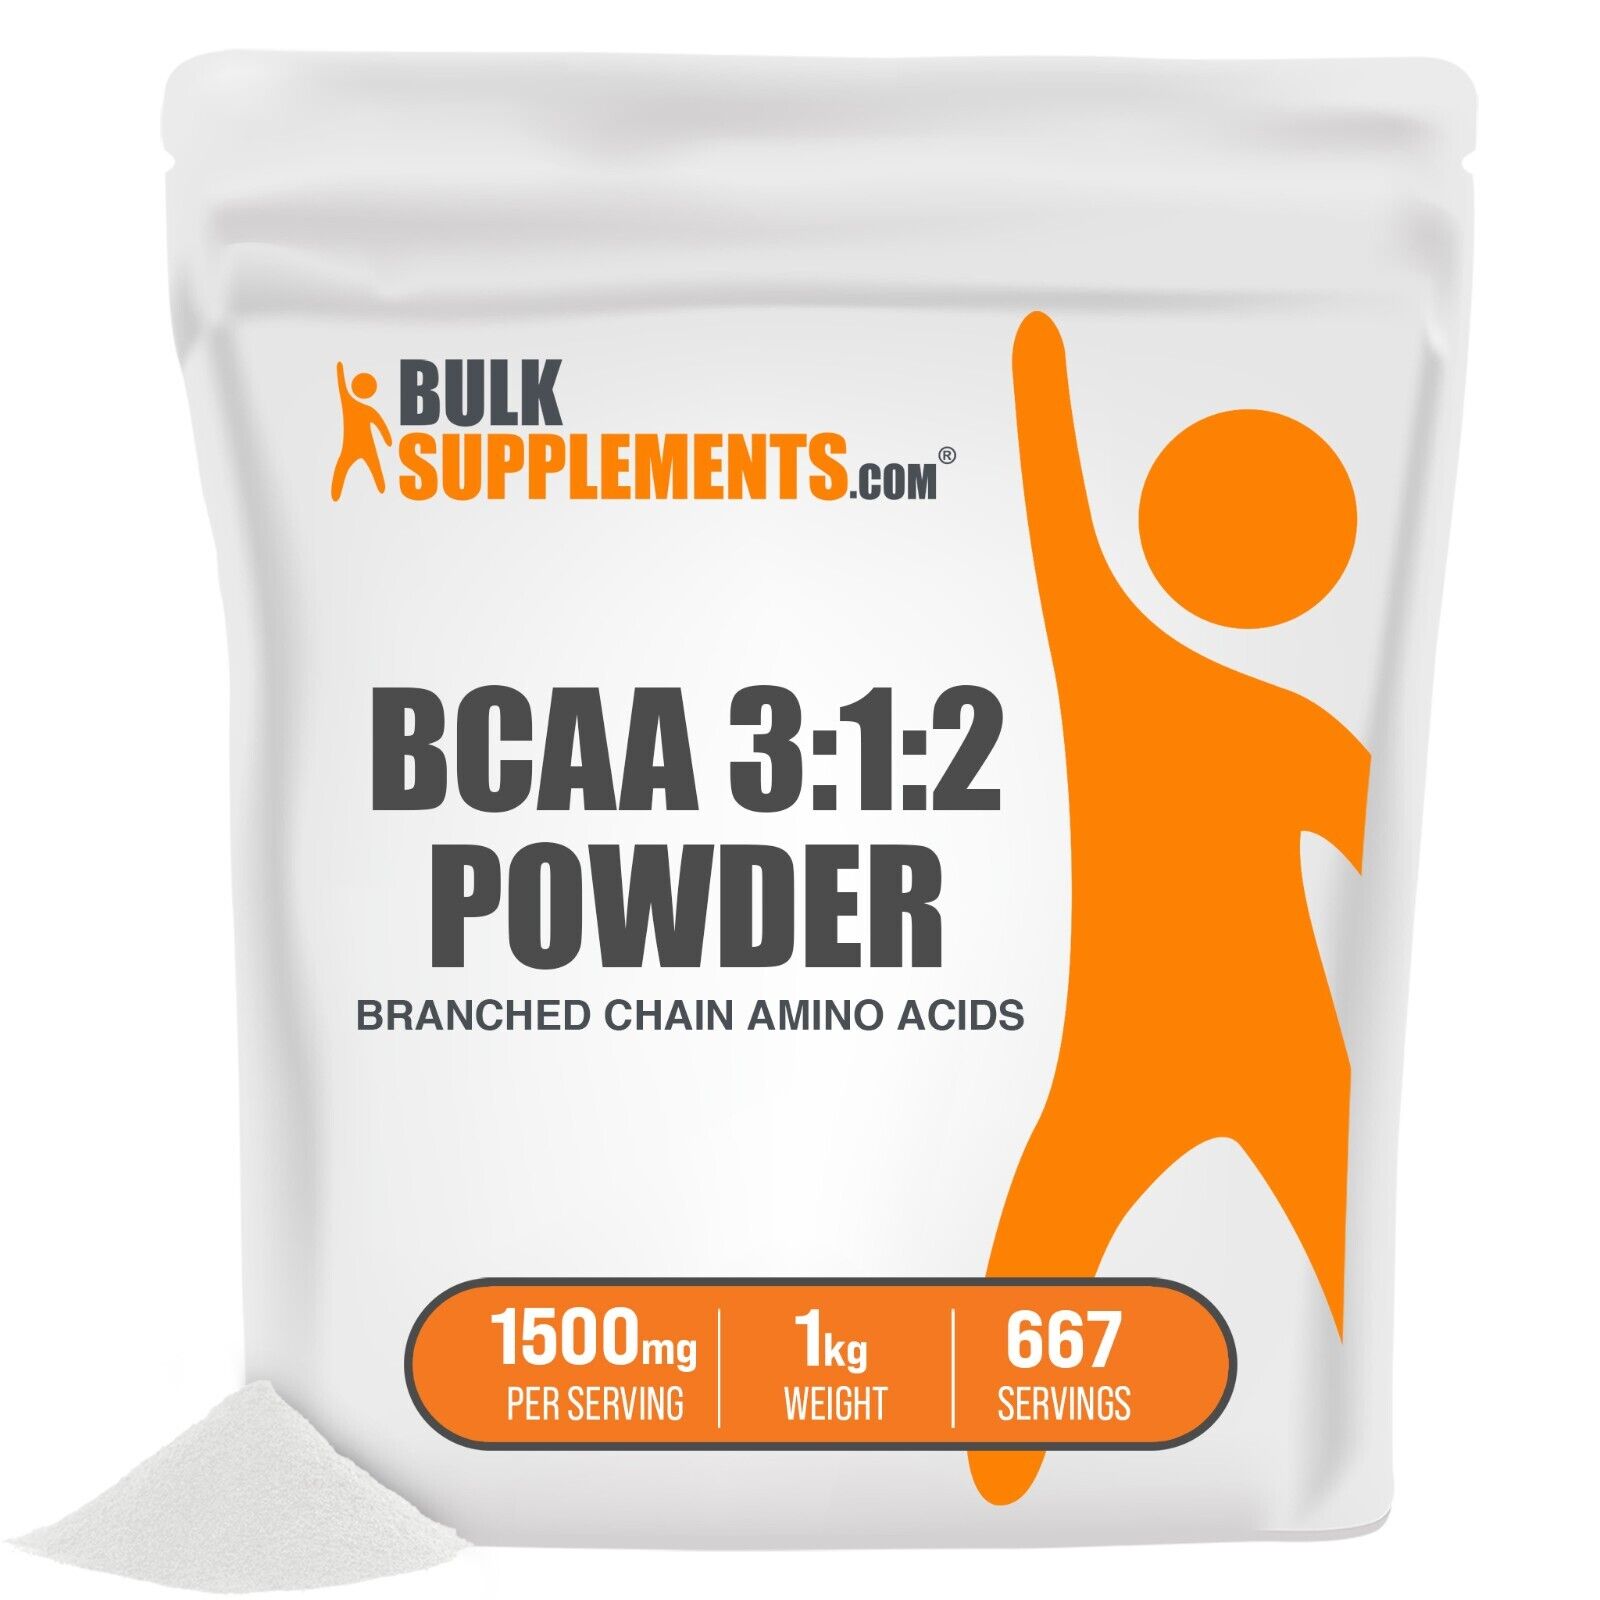 BCAA 3:1:2 - Branched Chain Amino Acids